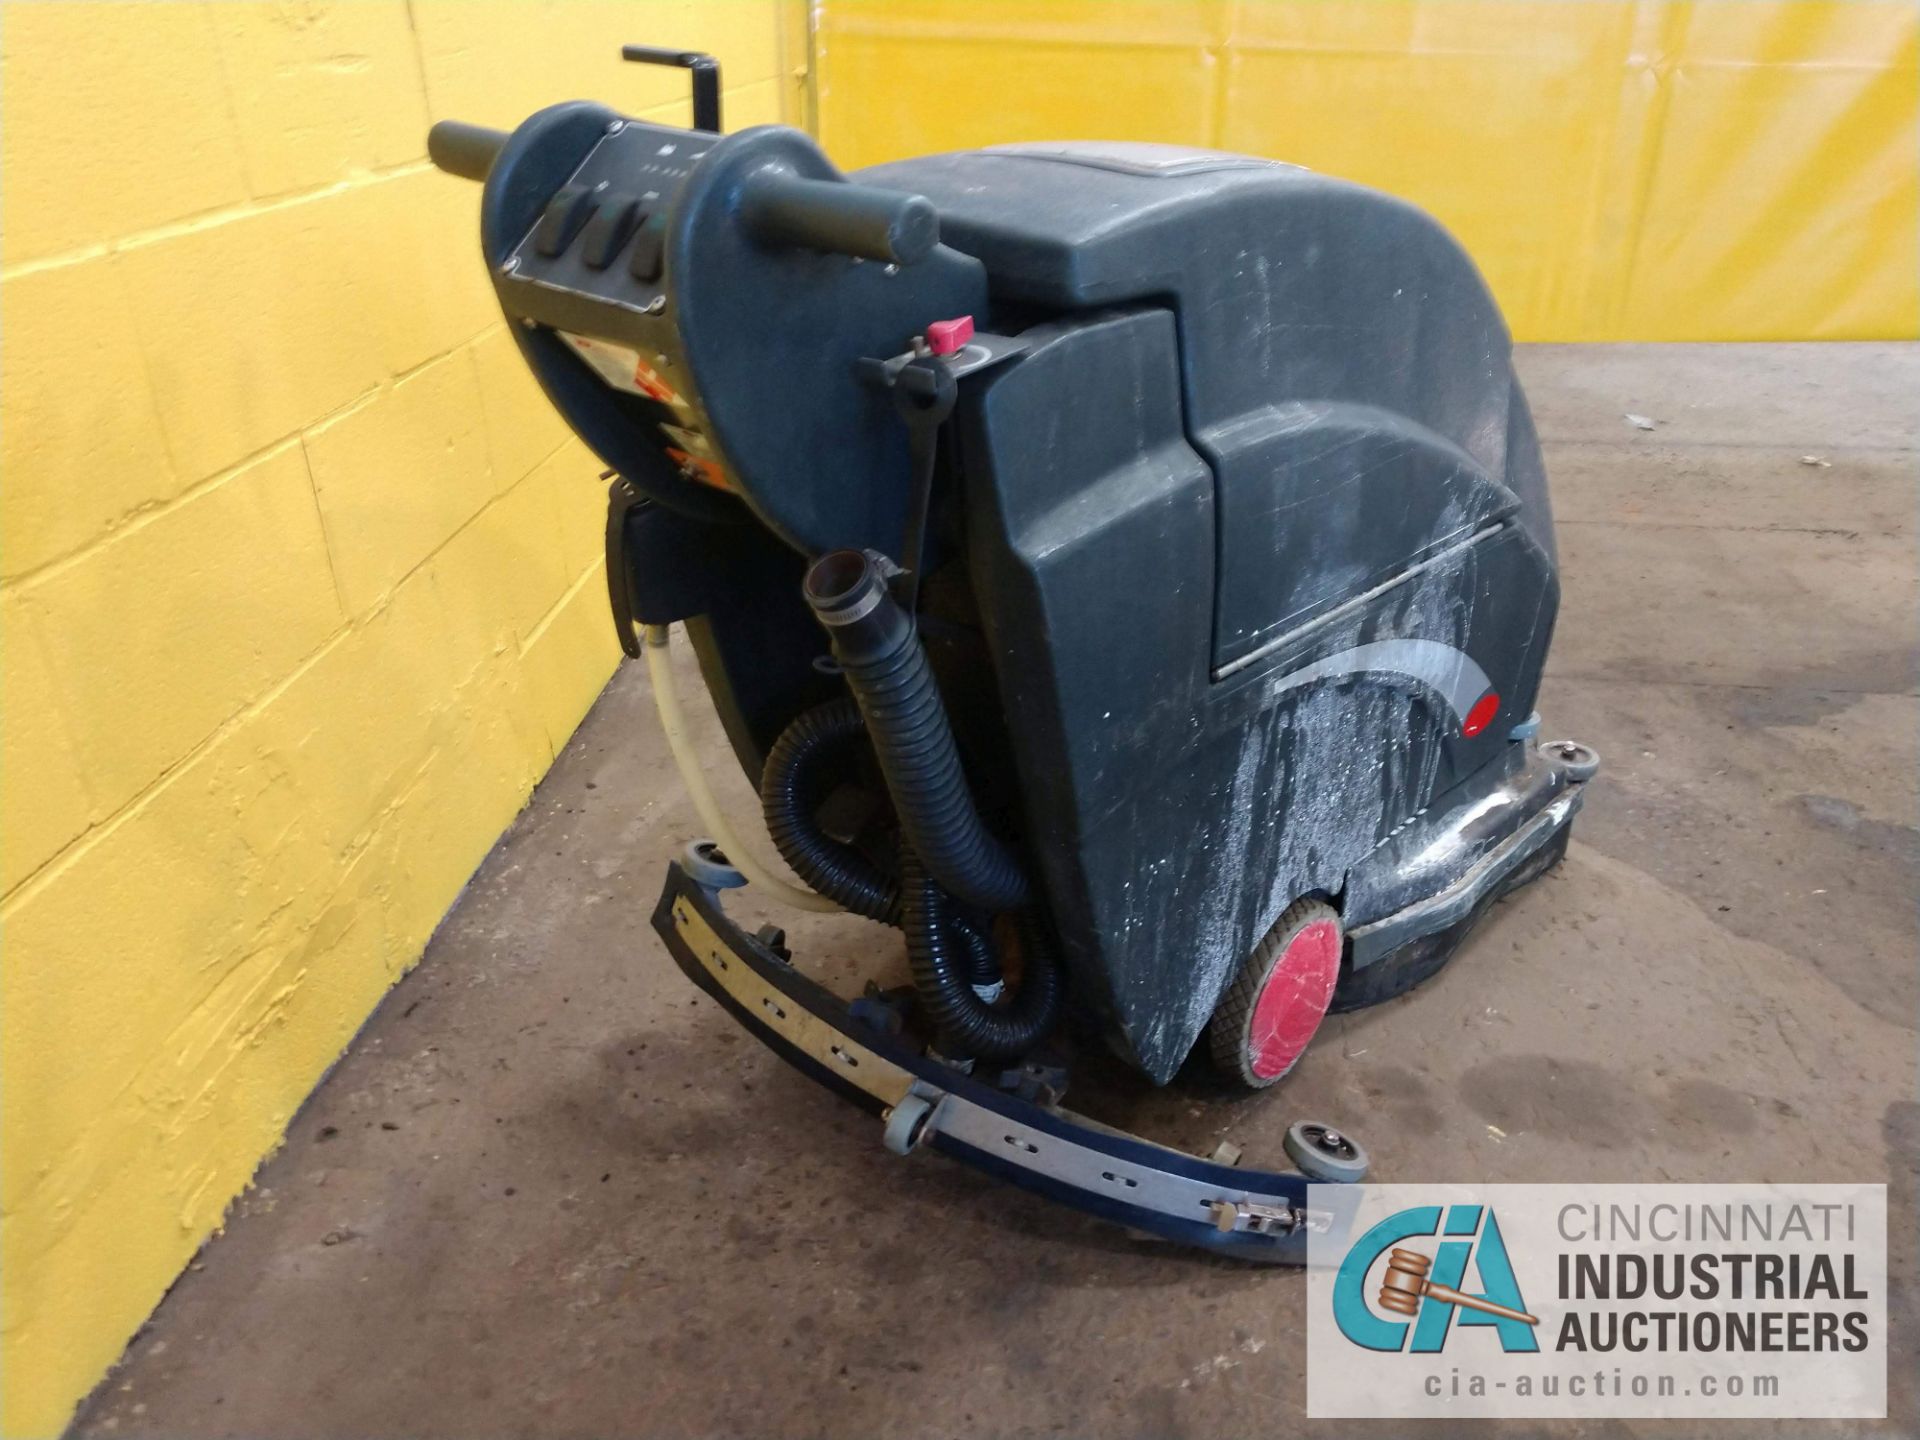 VIPER MODEL FANG20 FLOOR SCRUBBER - $20.00 Rigging Fee Due to Onsite Rigger - Located in Toledo, - Image 2 of 4